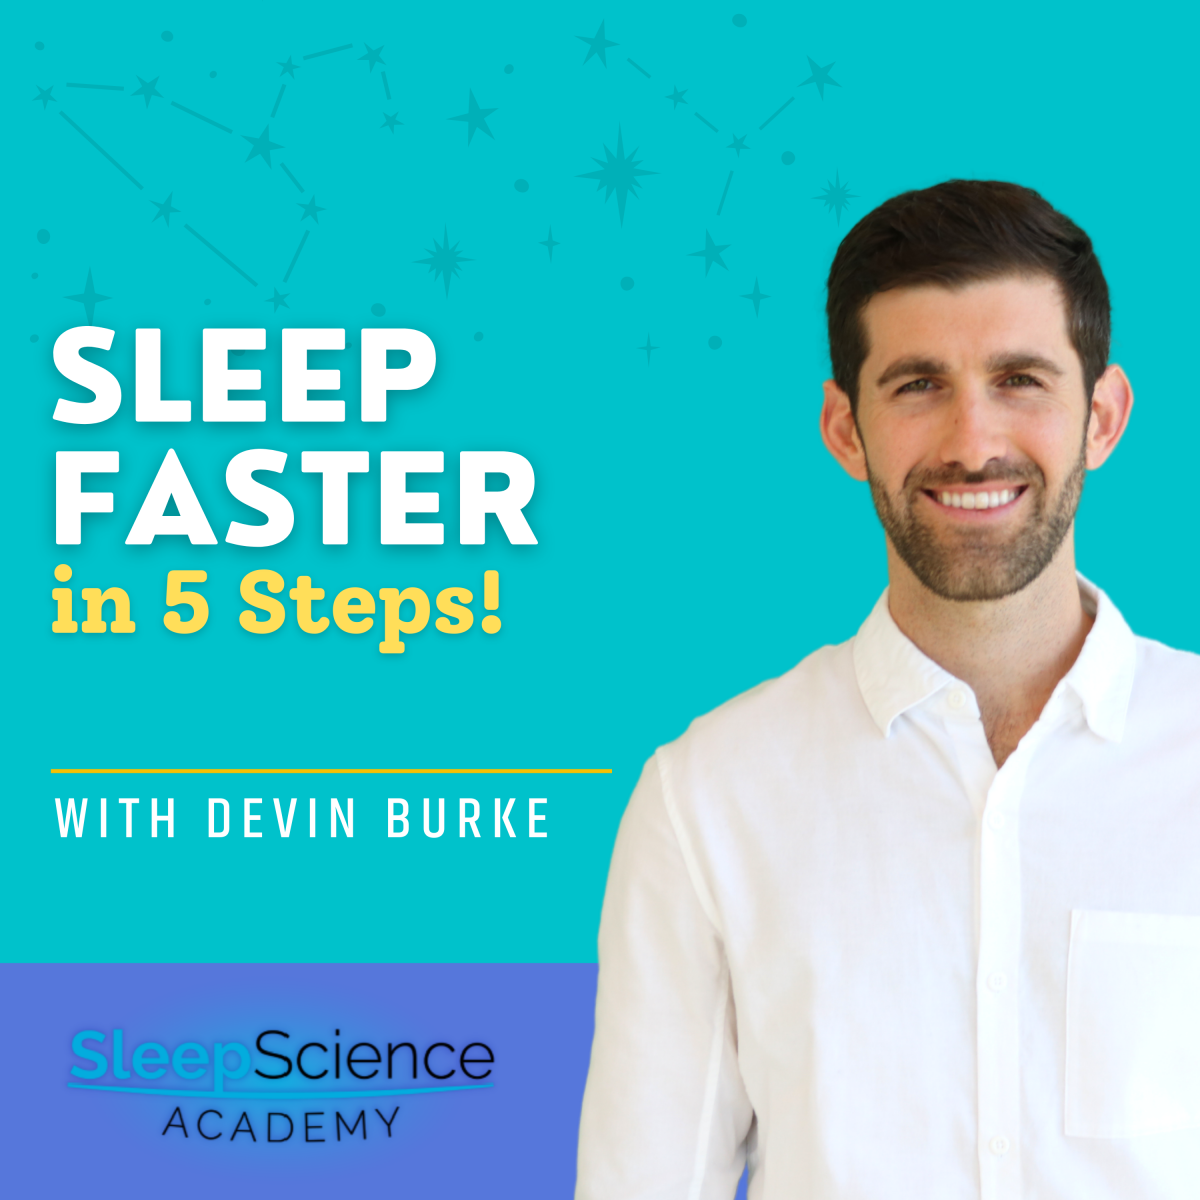 How-To-Sleep-Faster-5-Simple-Steps-1200x1200.png